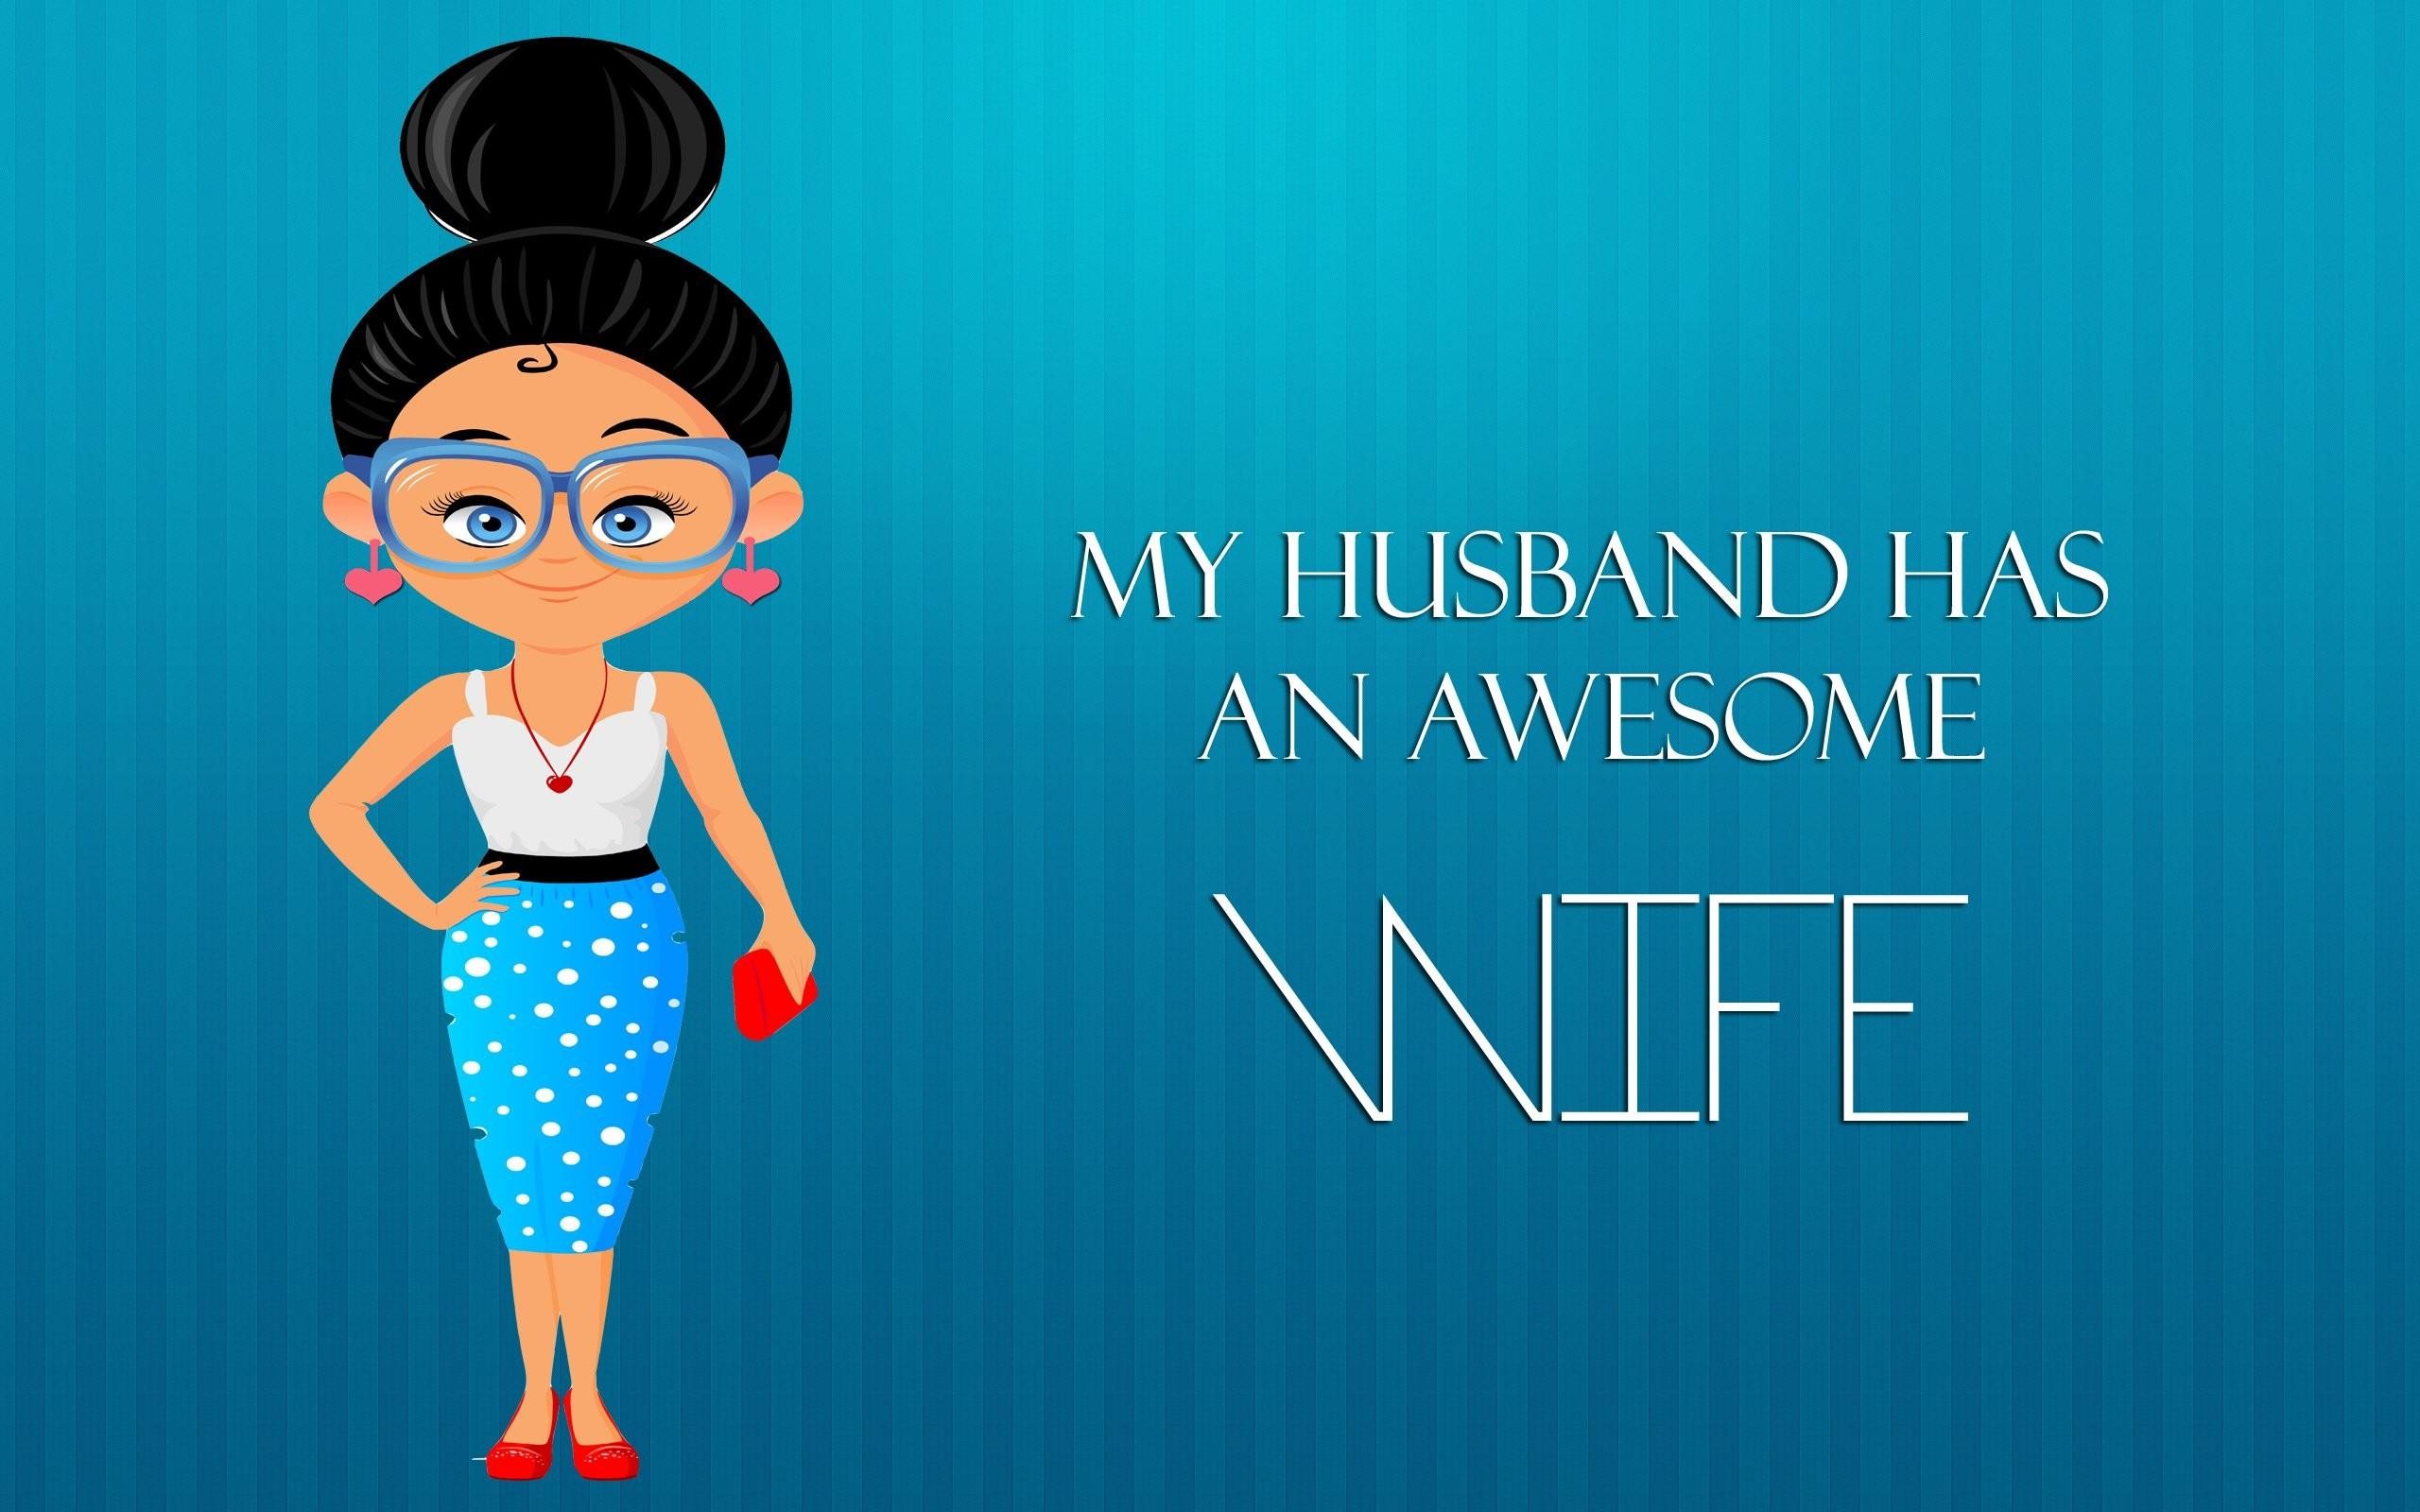 Sorry Wallpaper For Husband - Wife And Husband Funny - HD Wallpaper 